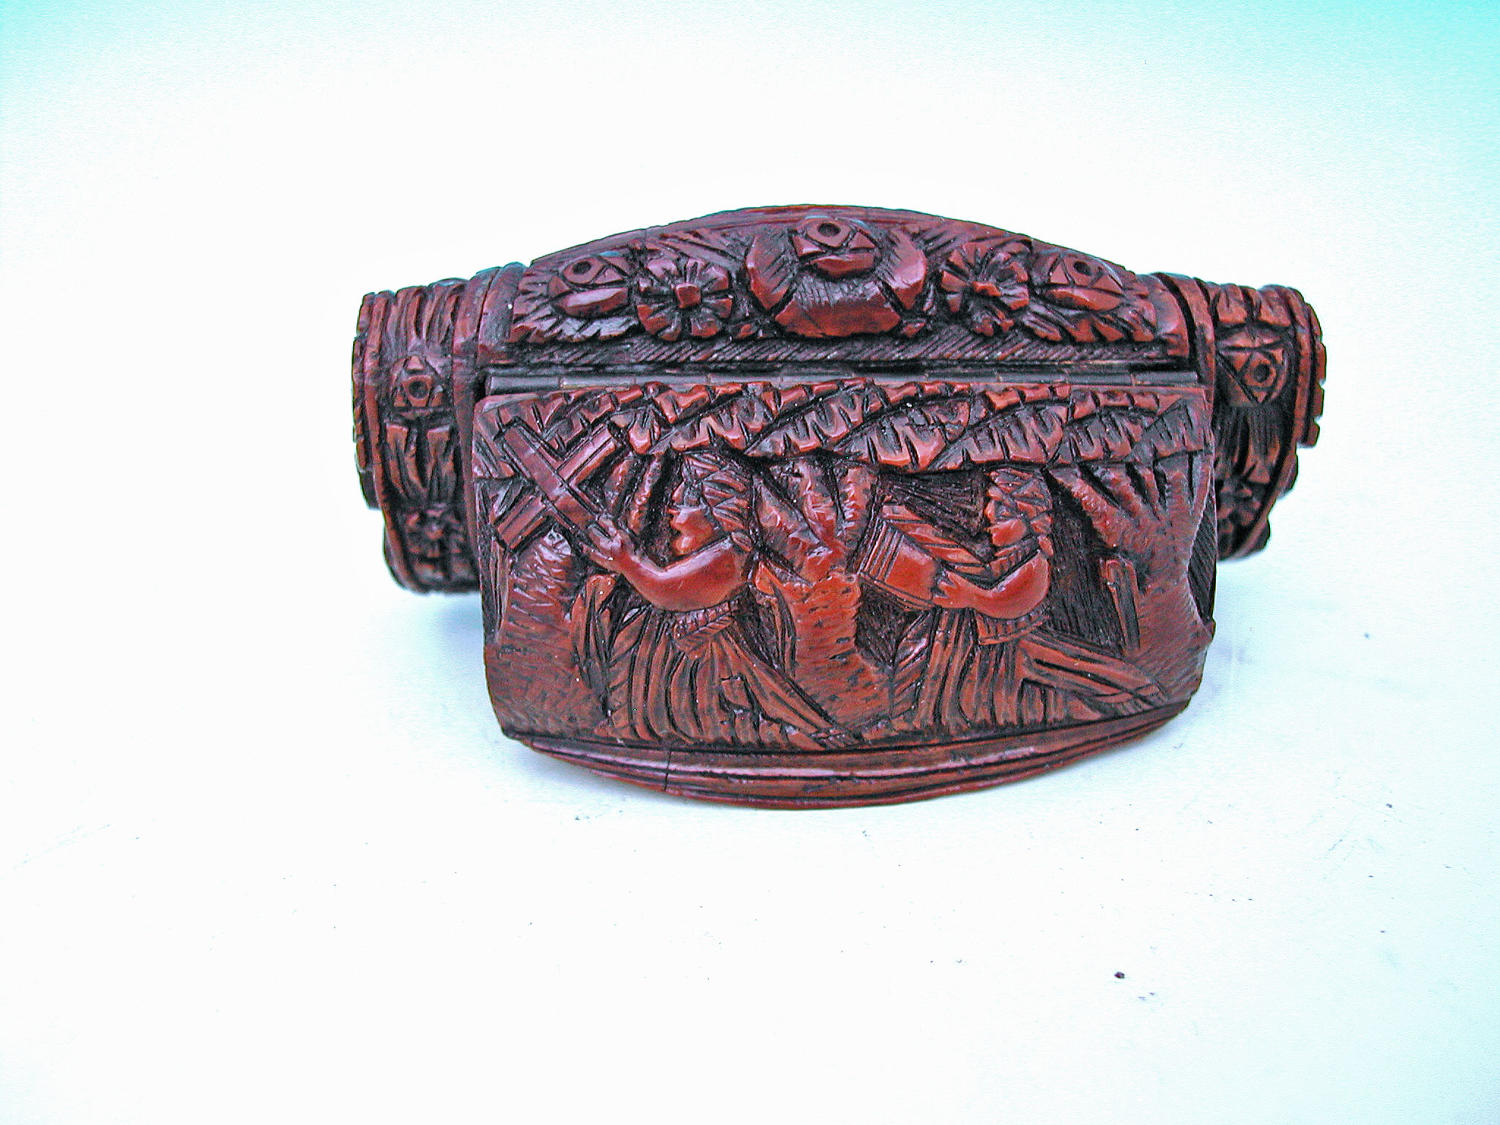 Antique 19thc Carved Coquilla Nut Snuff Box.  French. C1840-60